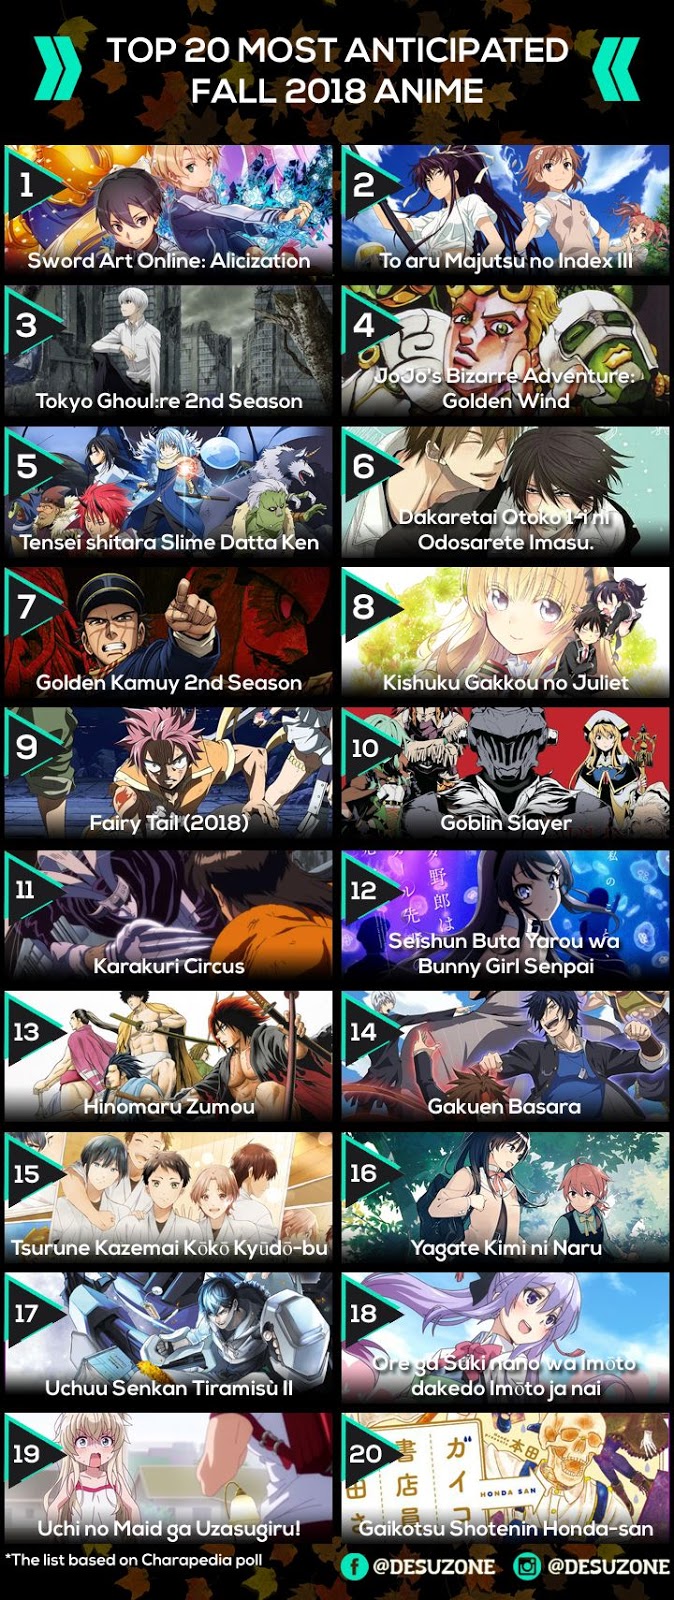 Most Anticipated Fall 2018 Anime Series